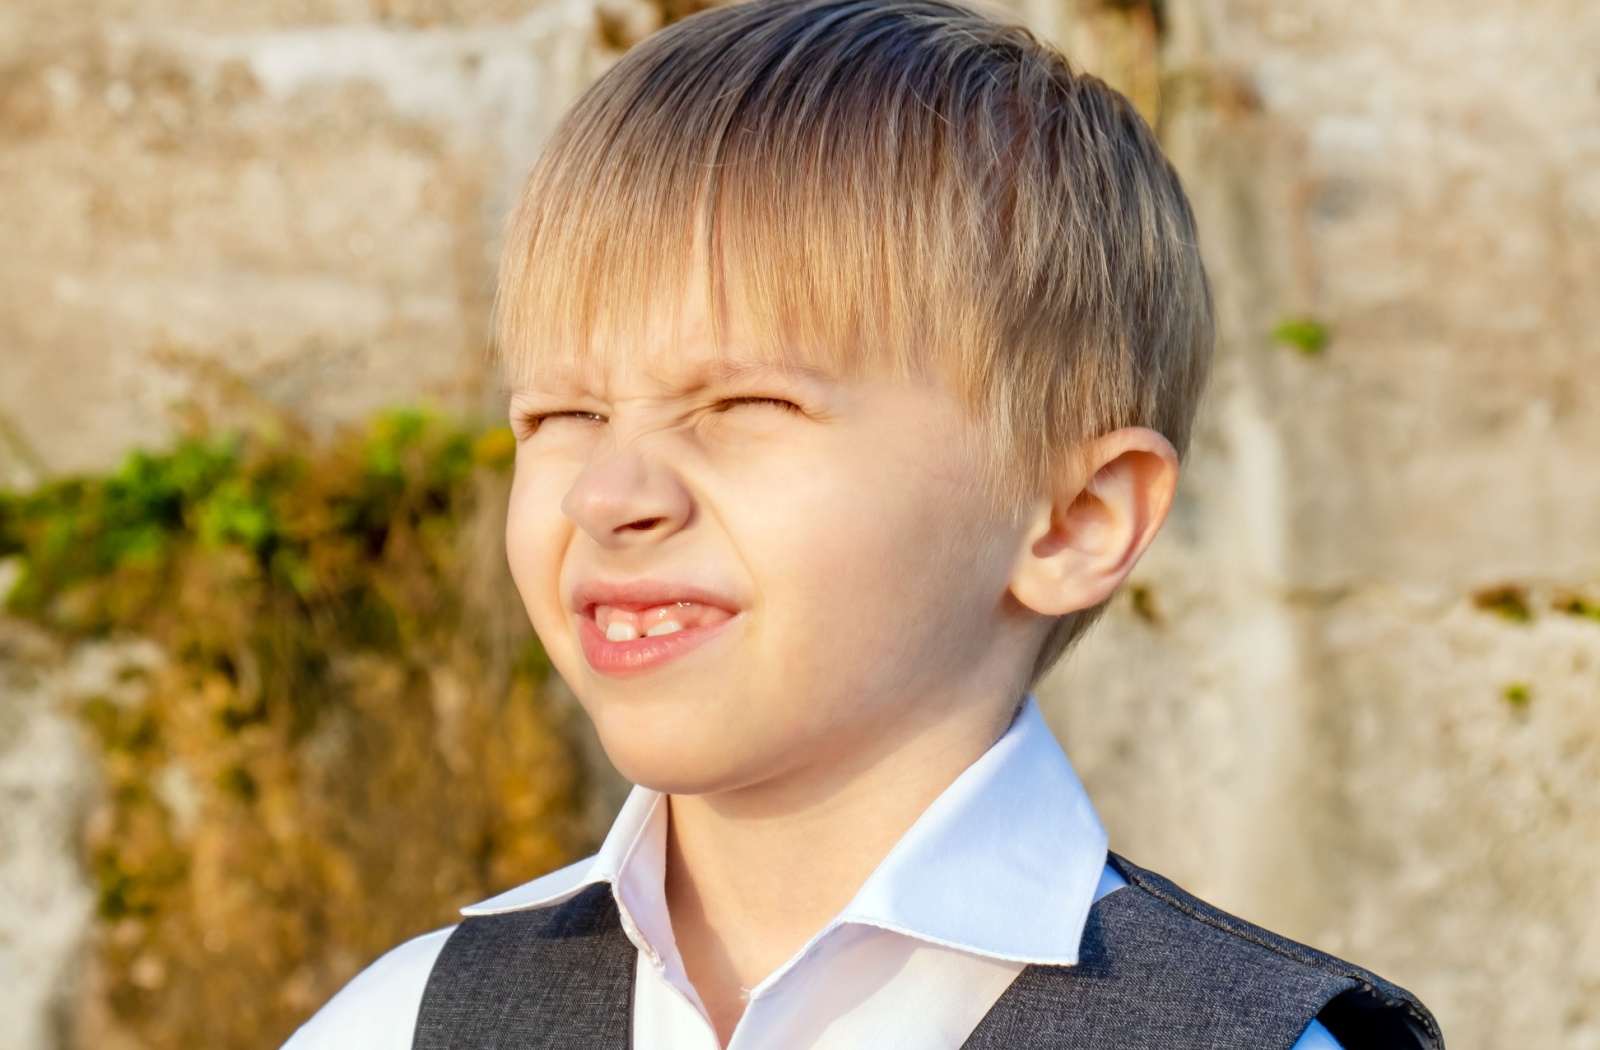 A boy squinting his eyes from the bright sun outdoors.
